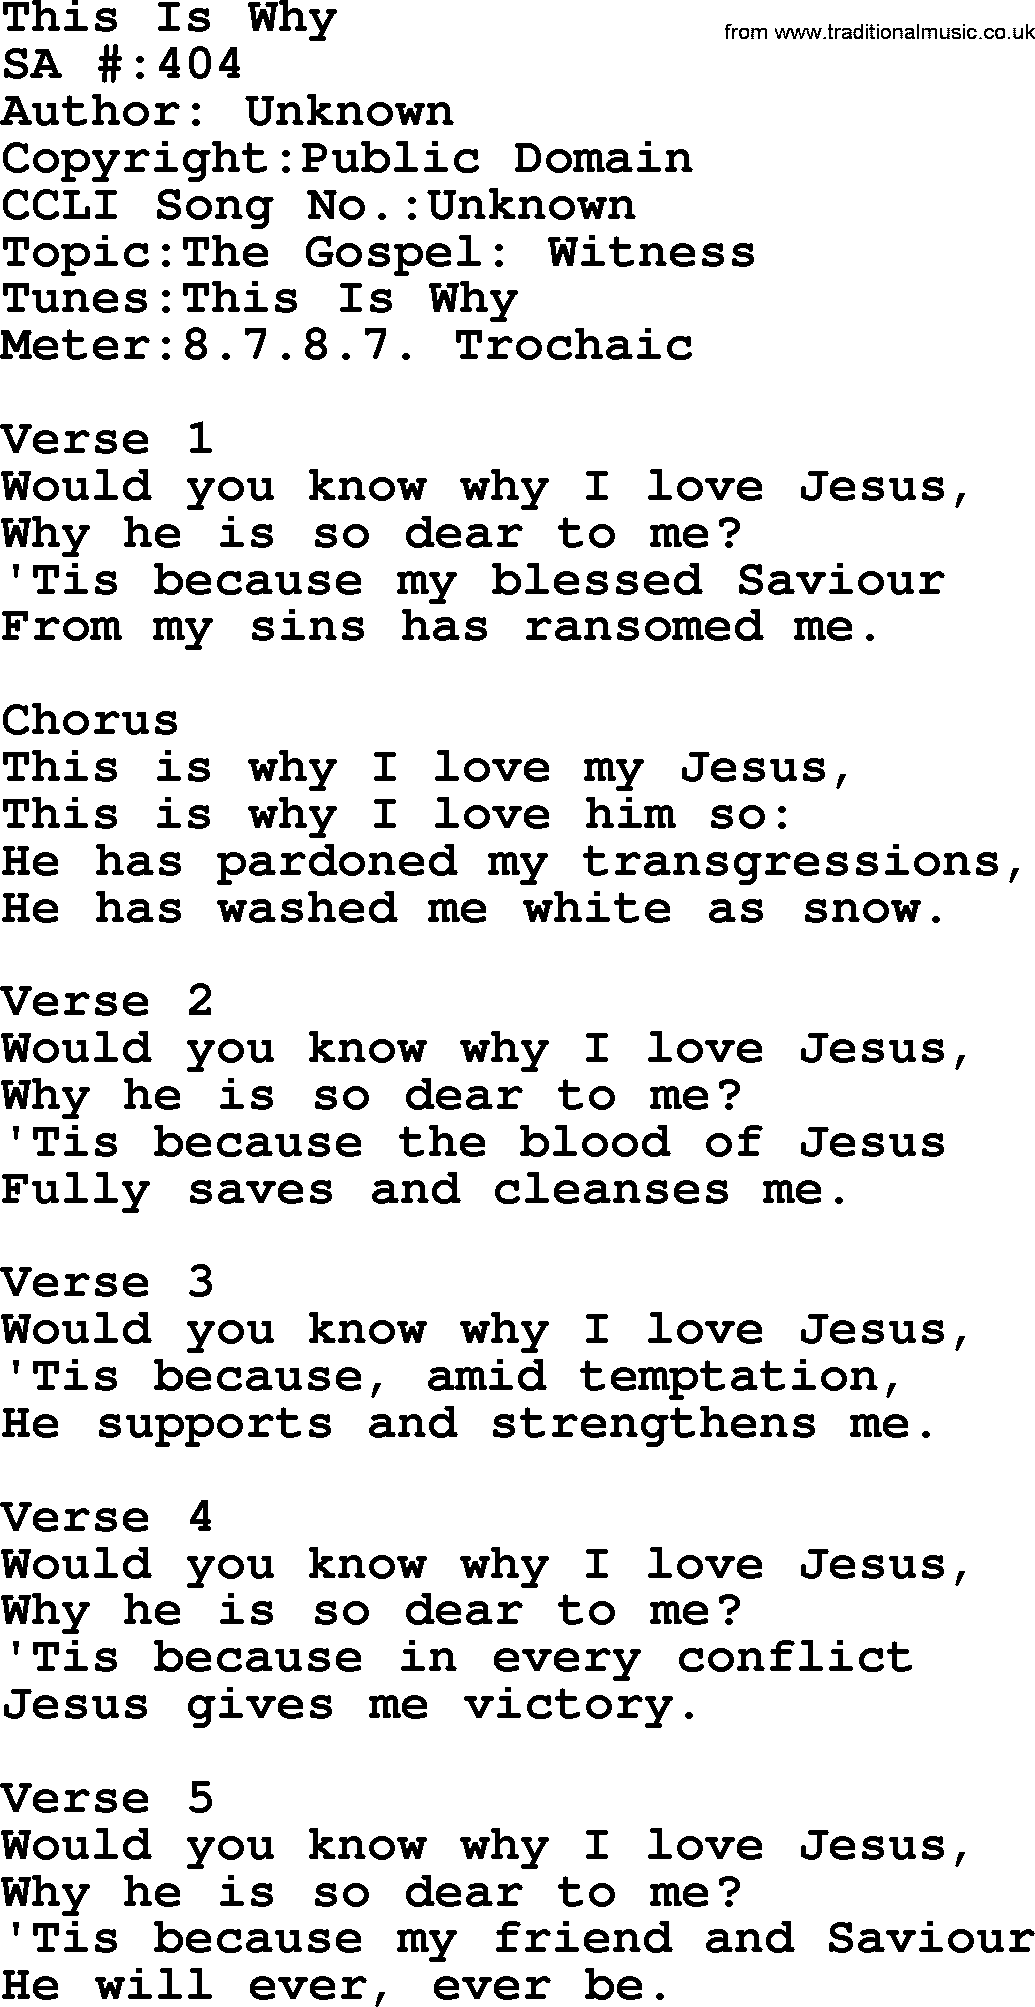 Salvation Army Hymnal, title: This Is Why, with lyrics and PDF,